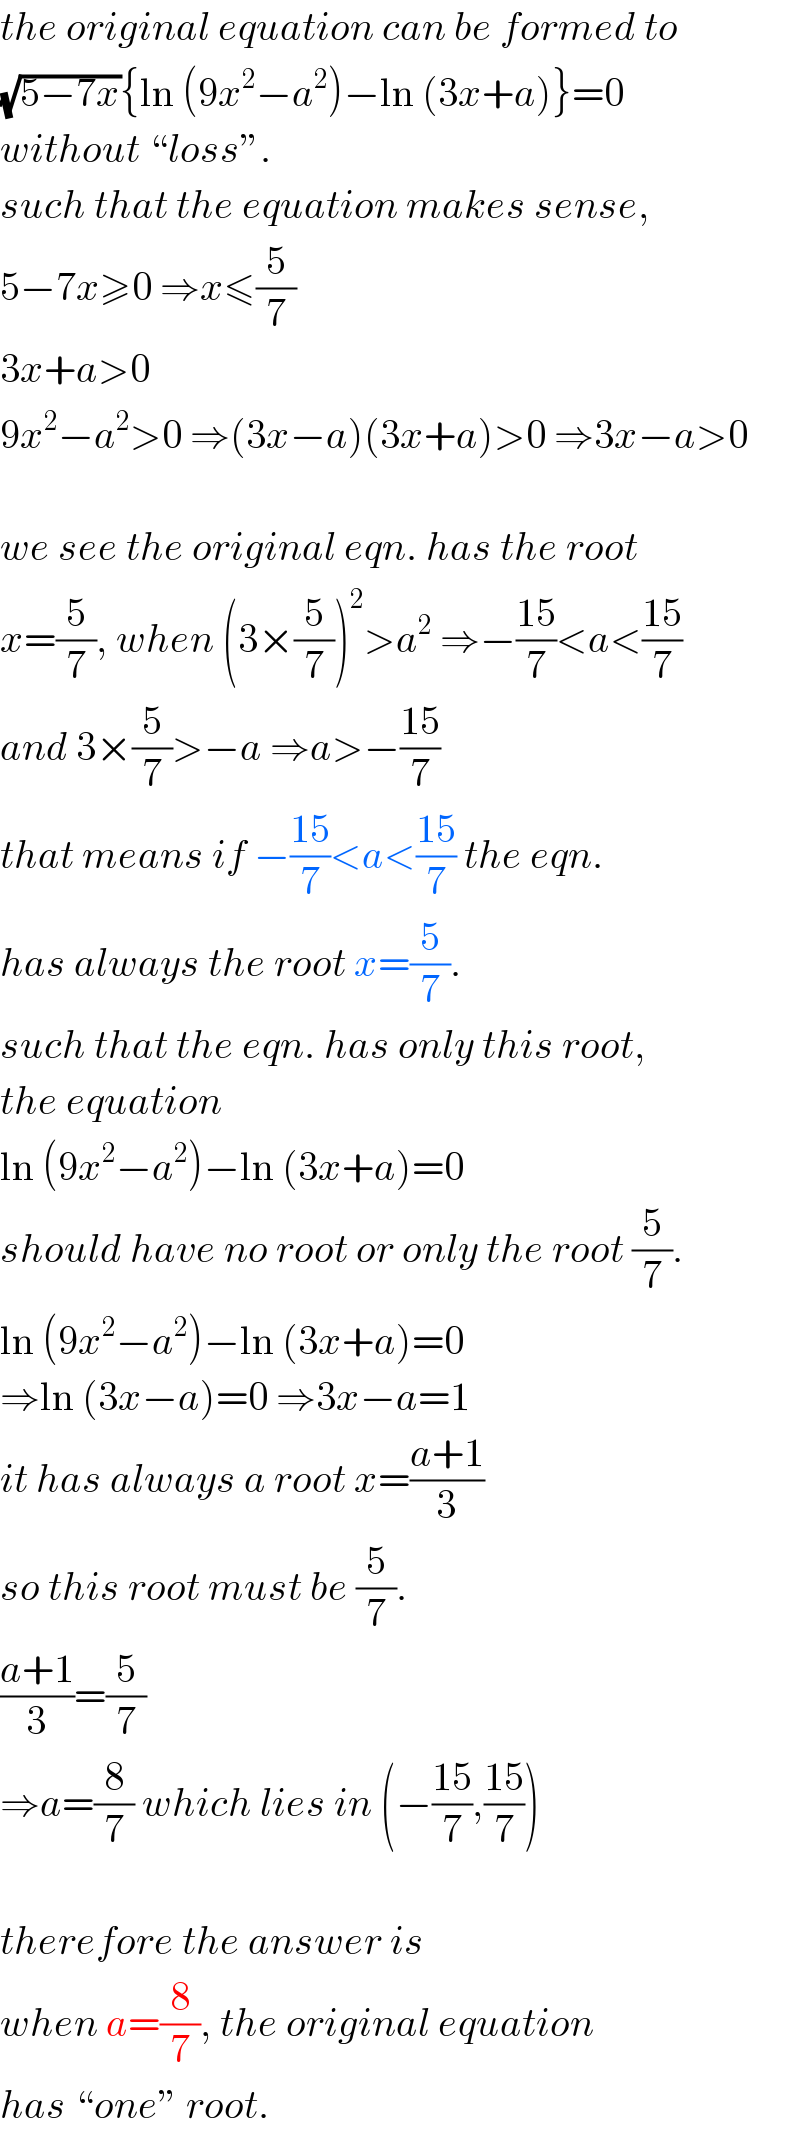 the original equation can be formed to  (√(5−7x)){ln (9x^2 −a^2 )−ln (3x+a)}=0  without “loss”.  such that the equation makes sense,  5−7x≥0 ⇒x≤(5/7)  3x+a>0   9x^2 −a^2 >0 ⇒(3x−a)(3x+a)>0 ⇒3x−a>0    we see the original eqn. has the root  x=(5/7), when (3×(5/7))^2 >a^2  ⇒−((15)/7)<a<((15)/7)  and 3×(5/7)>−a ⇒a>−((15)/7)  that means if −((15)/7)<a<((15)/7) the eqn.  has always the root x=(5/7).  such that the eqn. has only this root,  the equation  ln (9x^2 −a^2 )−ln (3x+a)=0  should have no root or only the root (5/7).  ln (9x^2 −a^2 )−ln (3x+a)=0  ⇒ln (3x−a)=0 ⇒3x−a=1  it has always a root x=((a+1)/3)  so this root must be (5/7).  ((a+1)/3)=(5/7)  ⇒a=(8/7) which lies in (−((15)/7),((15)/7))    therefore the answer is  when a=(8/7), the original equation  has “one” root.  